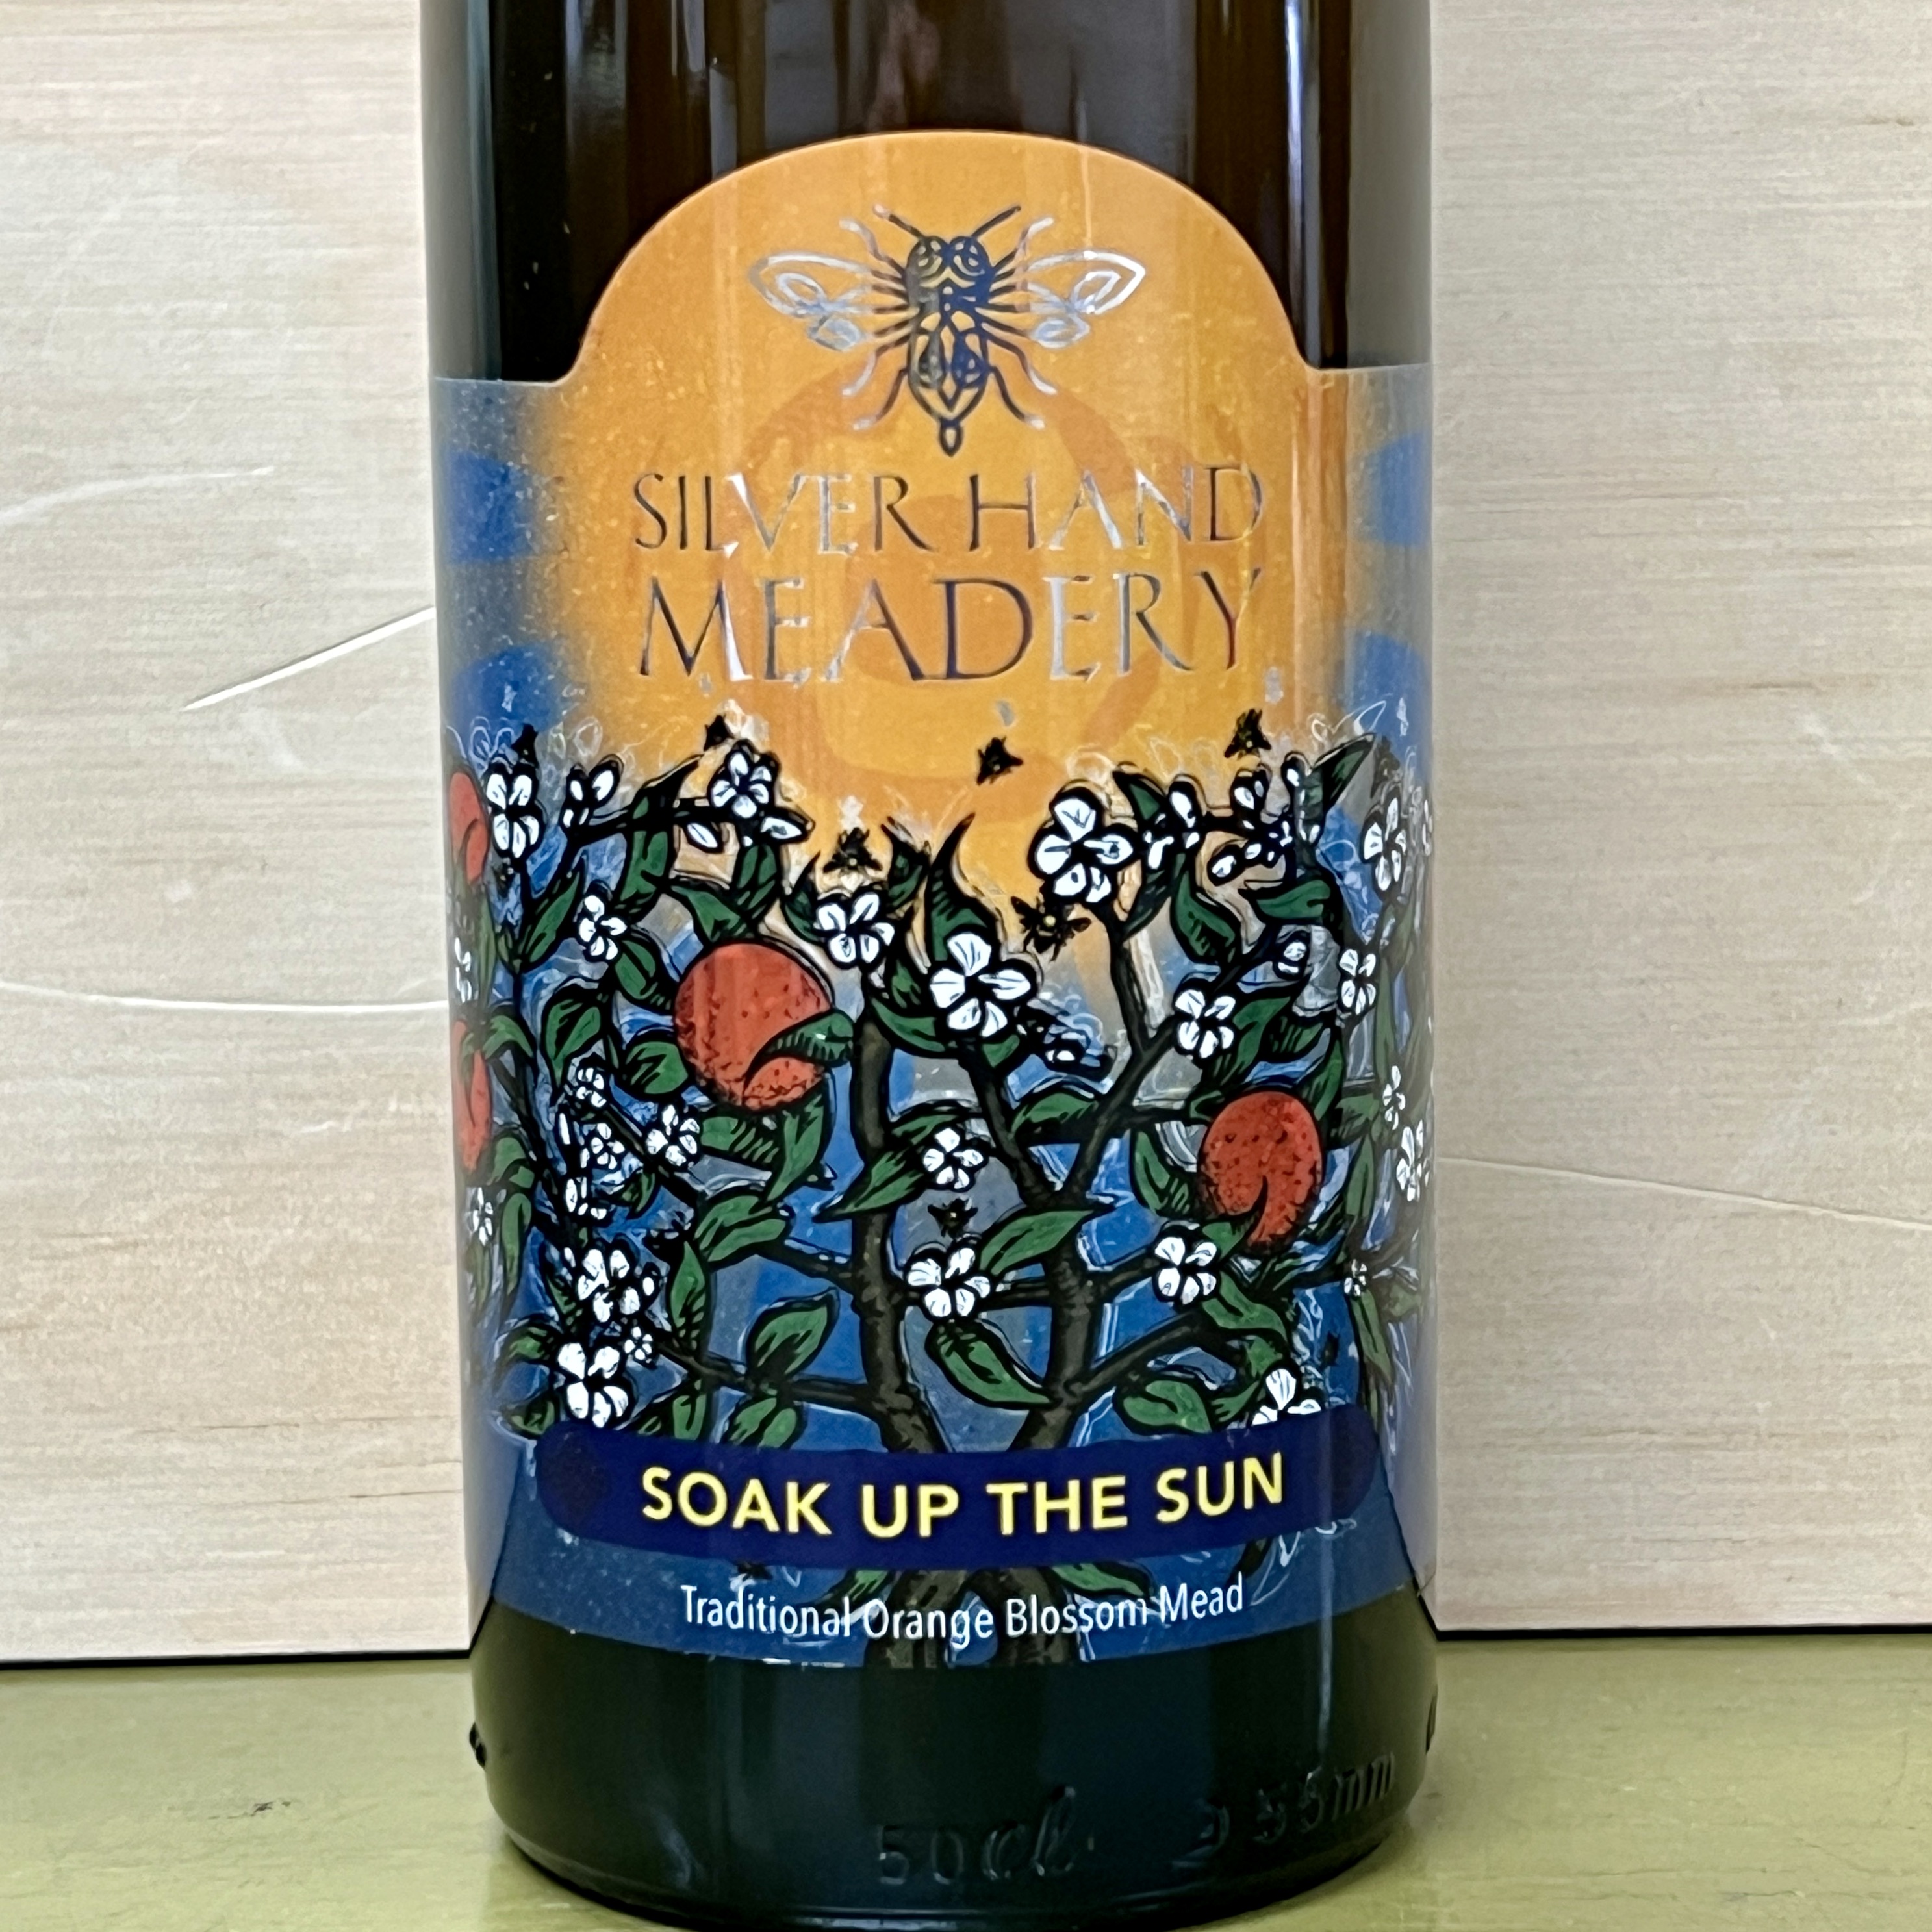 Silver Hand Meadery Soak Up the Sun mead 500 ml - Click Image to Close